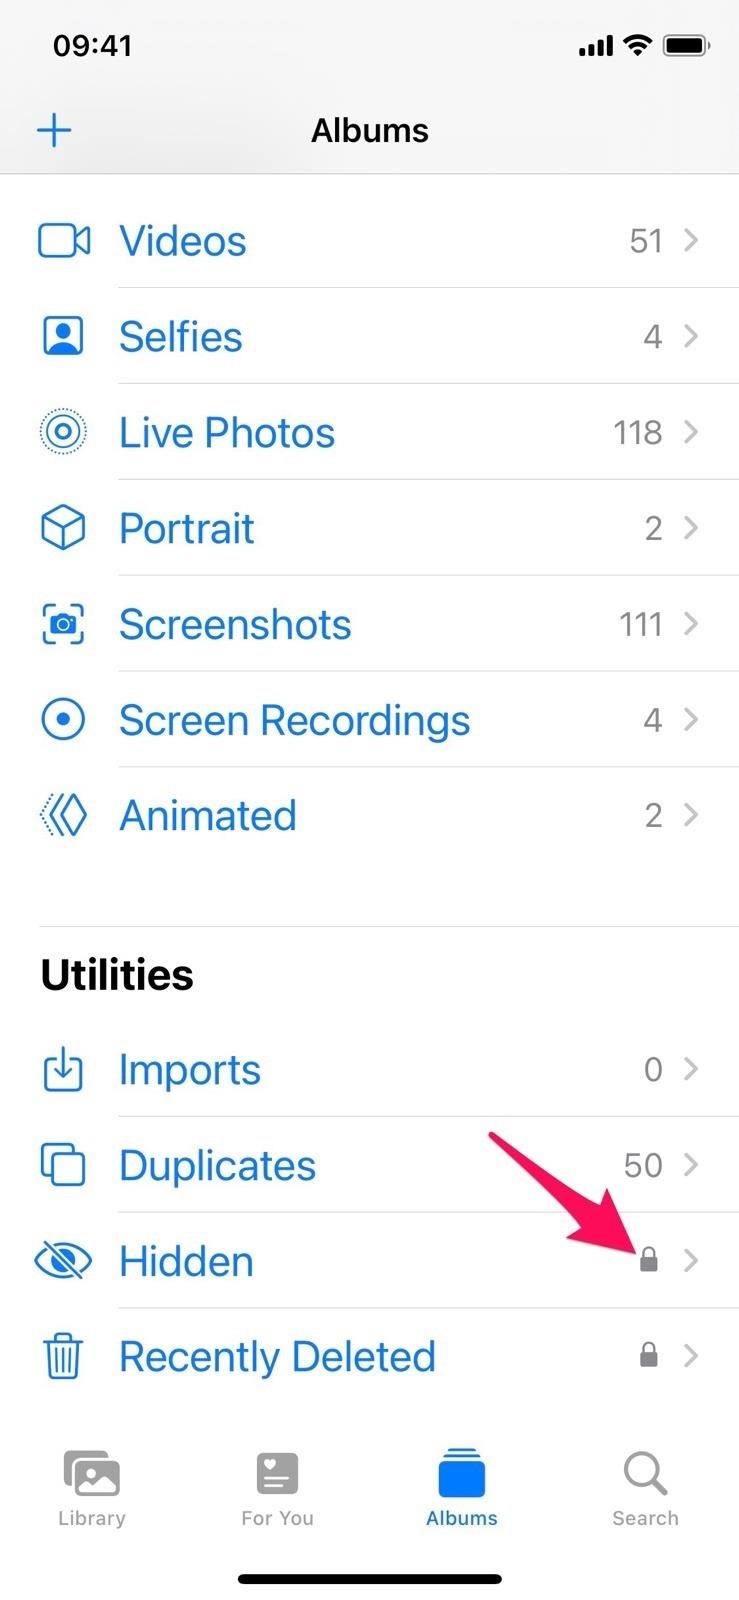 Apple Photos Has 21 New Features for iPhone That Make Your Life Easier « iOS & iPhone :: Gadget Hacks